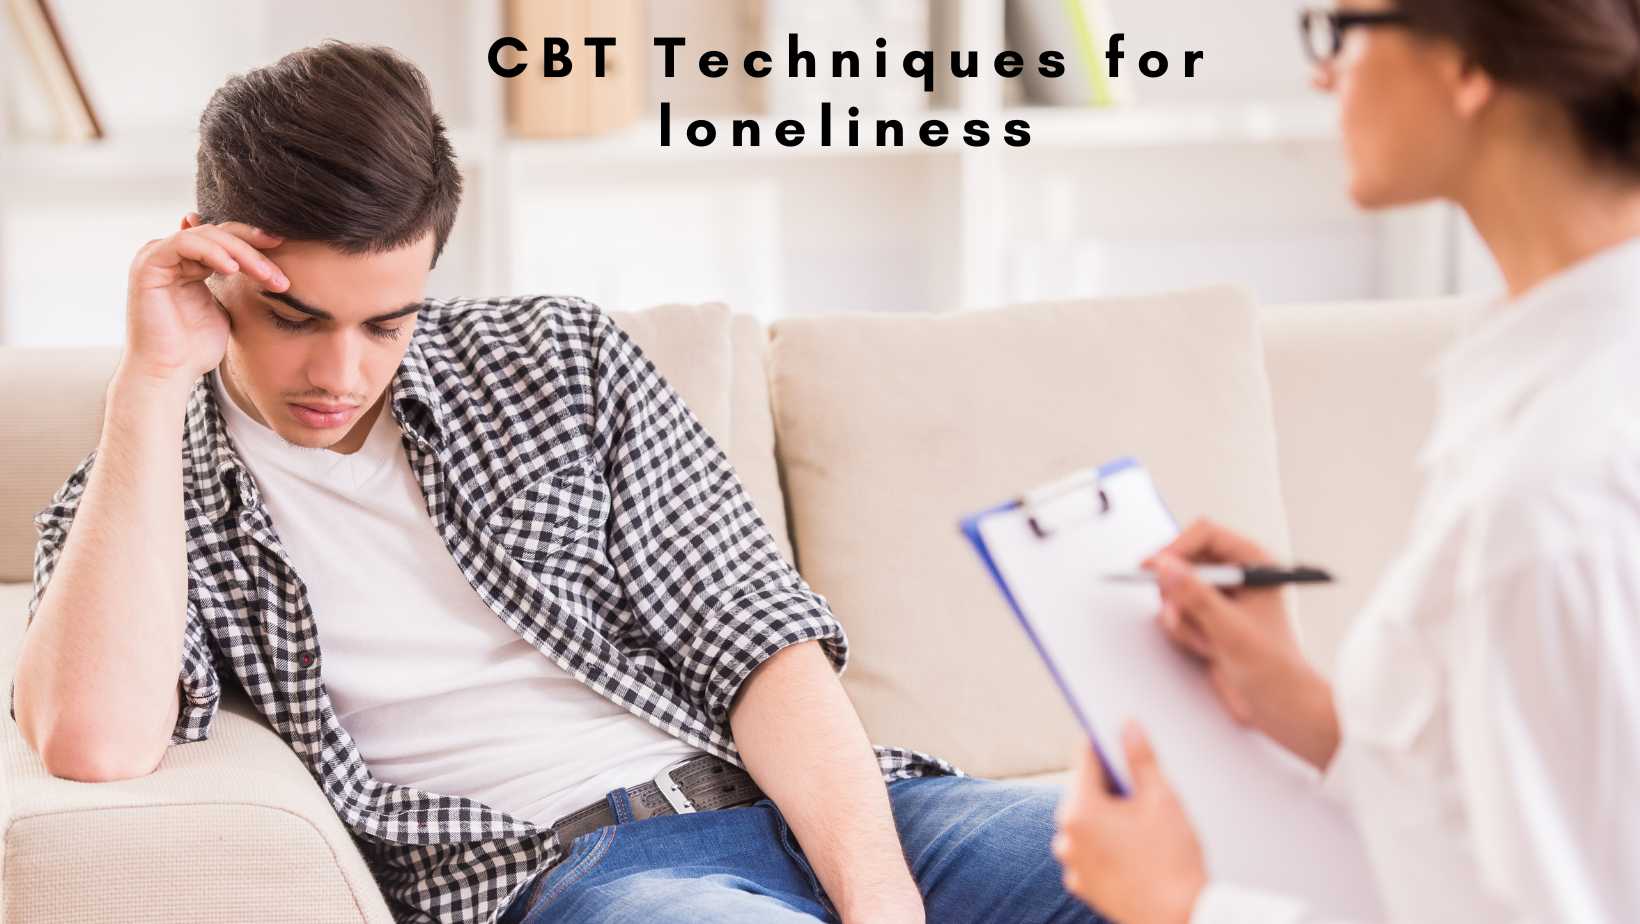 CBT Techniques for loneliness